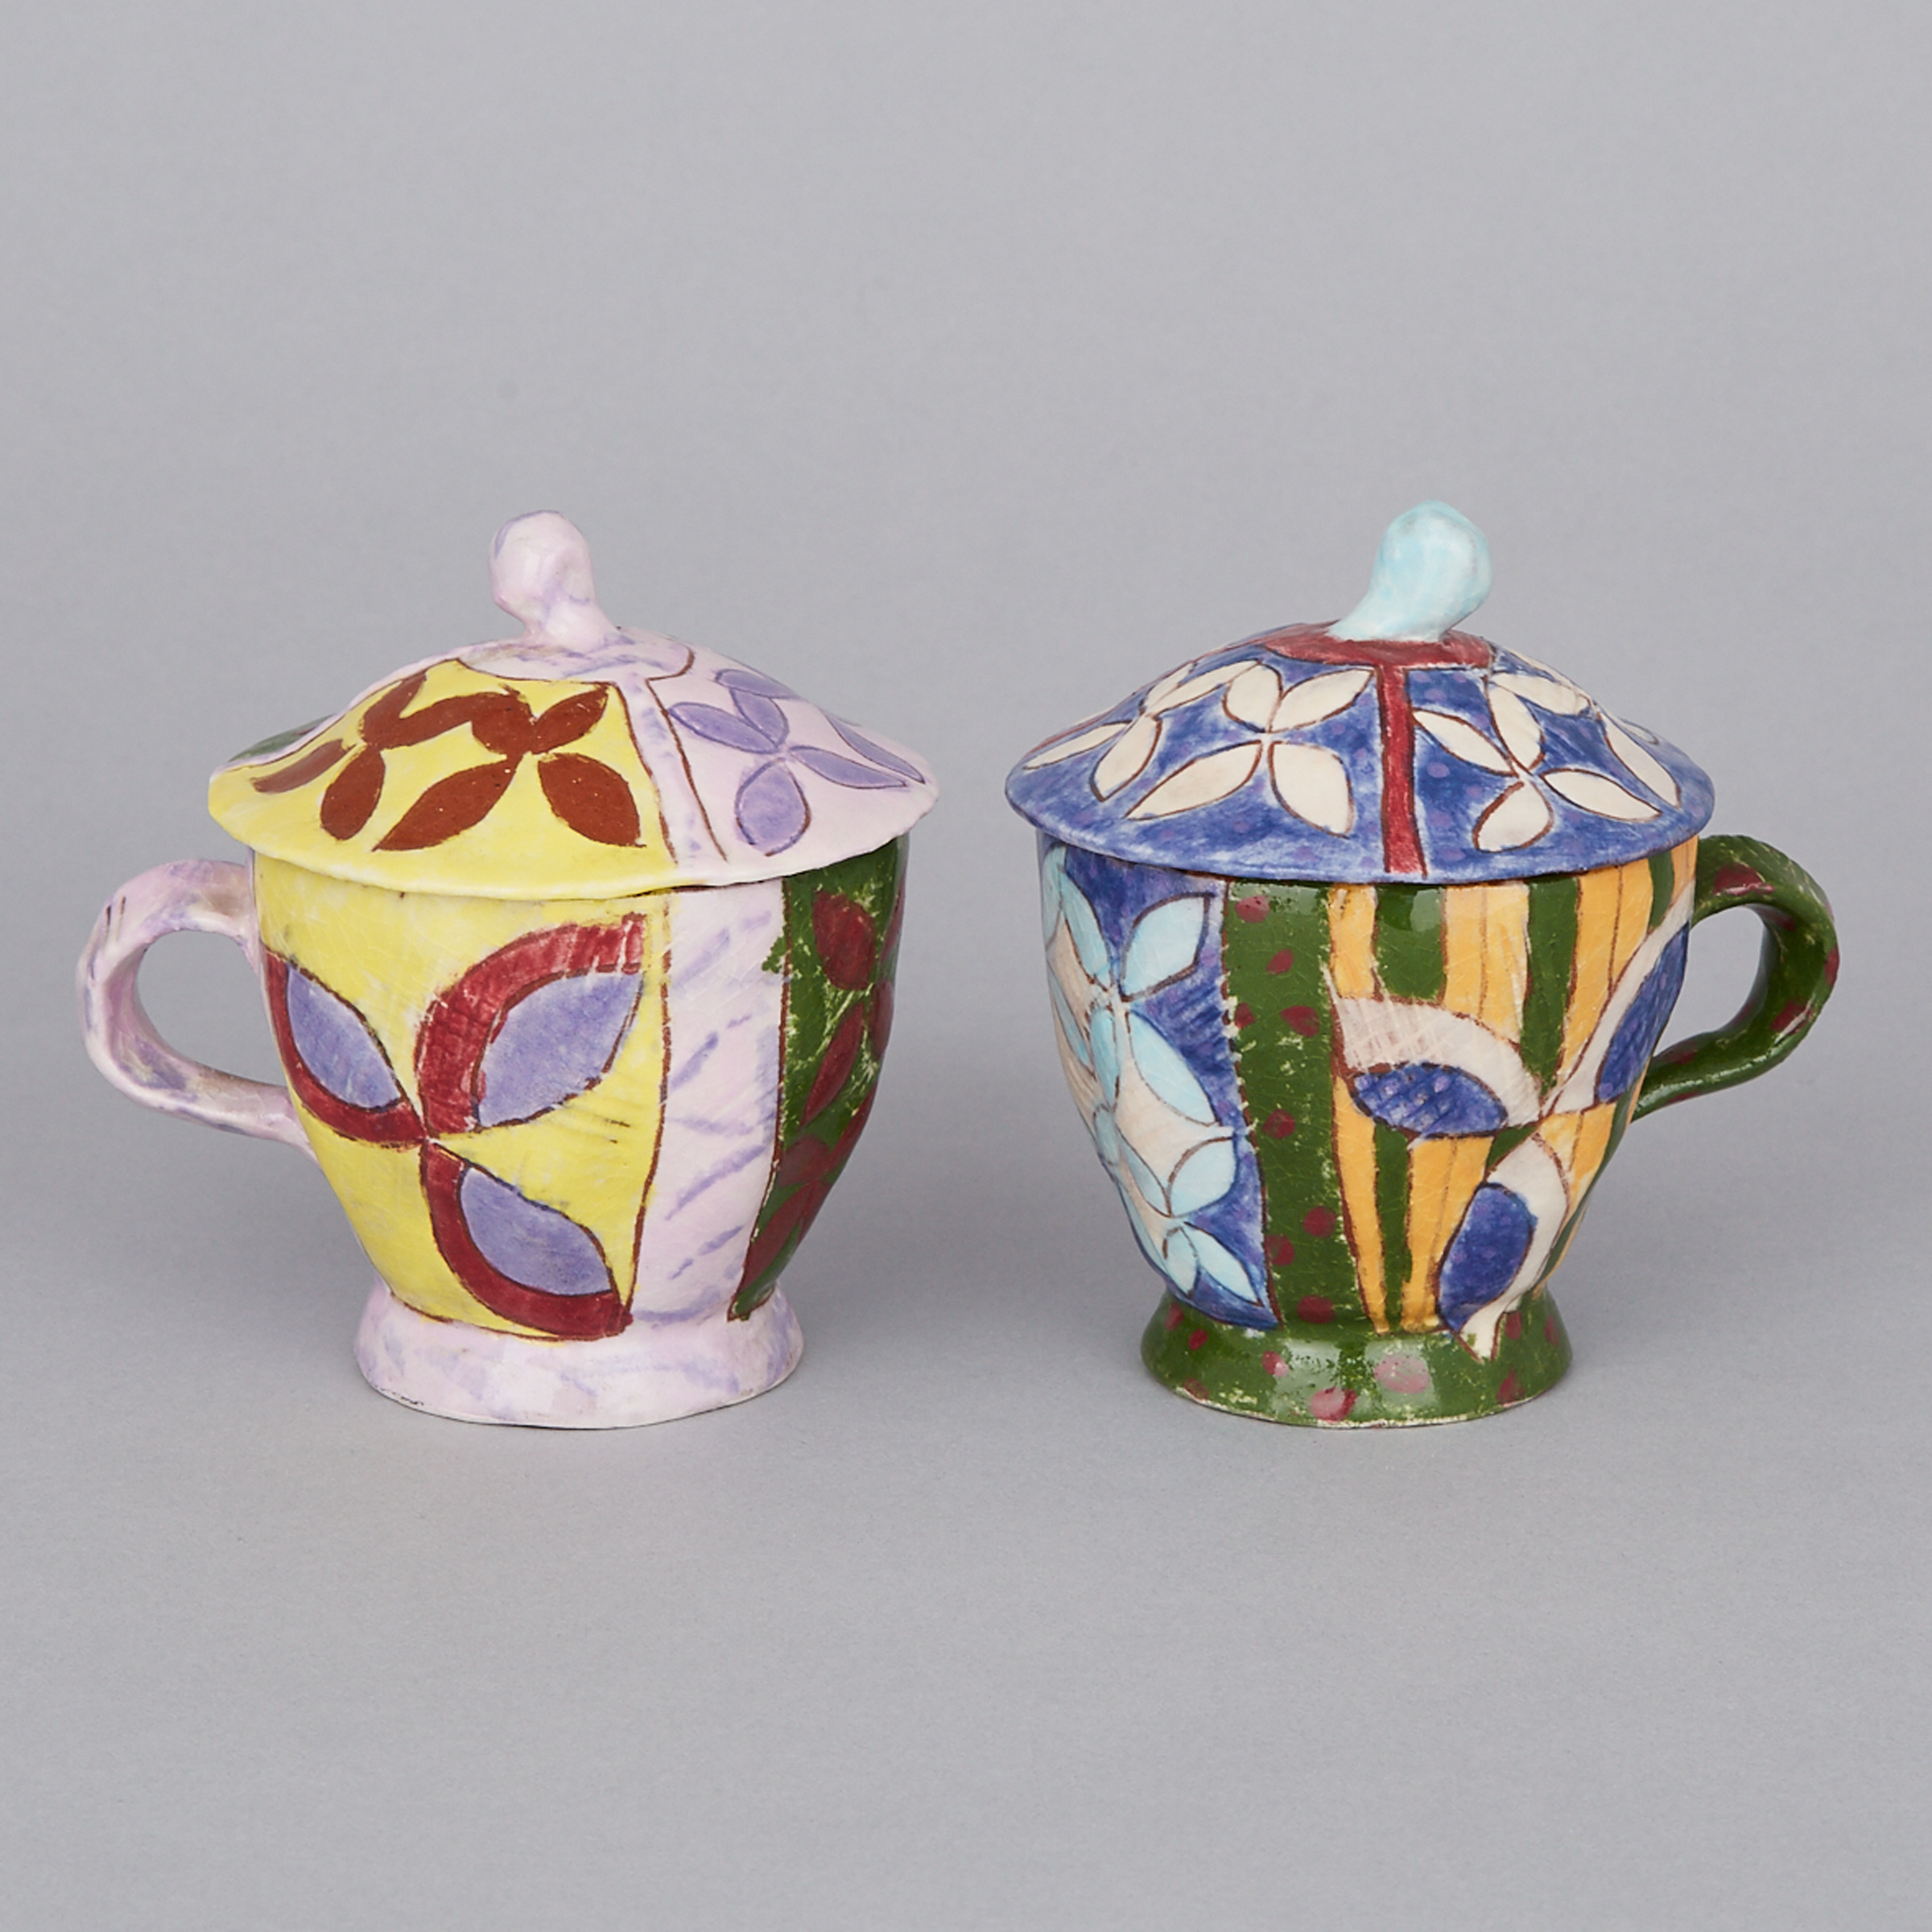 Karin Pavey (Canadian, b.1958) 
Pair of Covered Cups, 1984